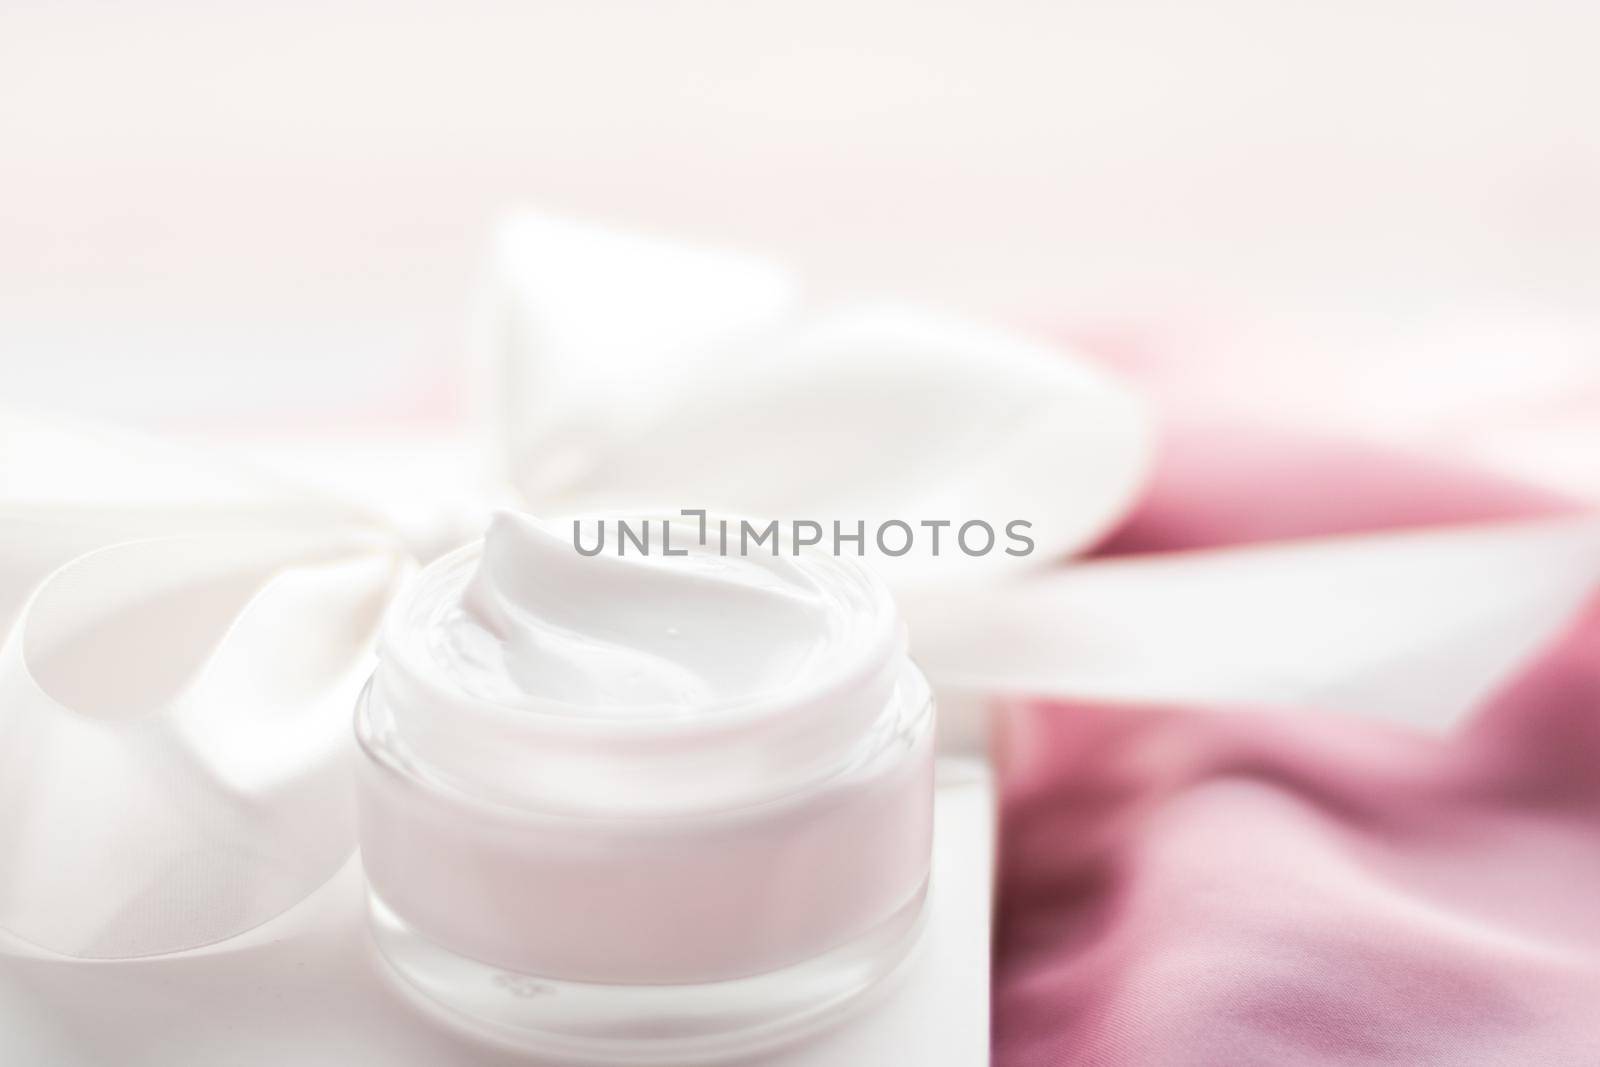 Beauty, cosmetics and skincare styled concept - Luxury moisturizing cream and a white gift box